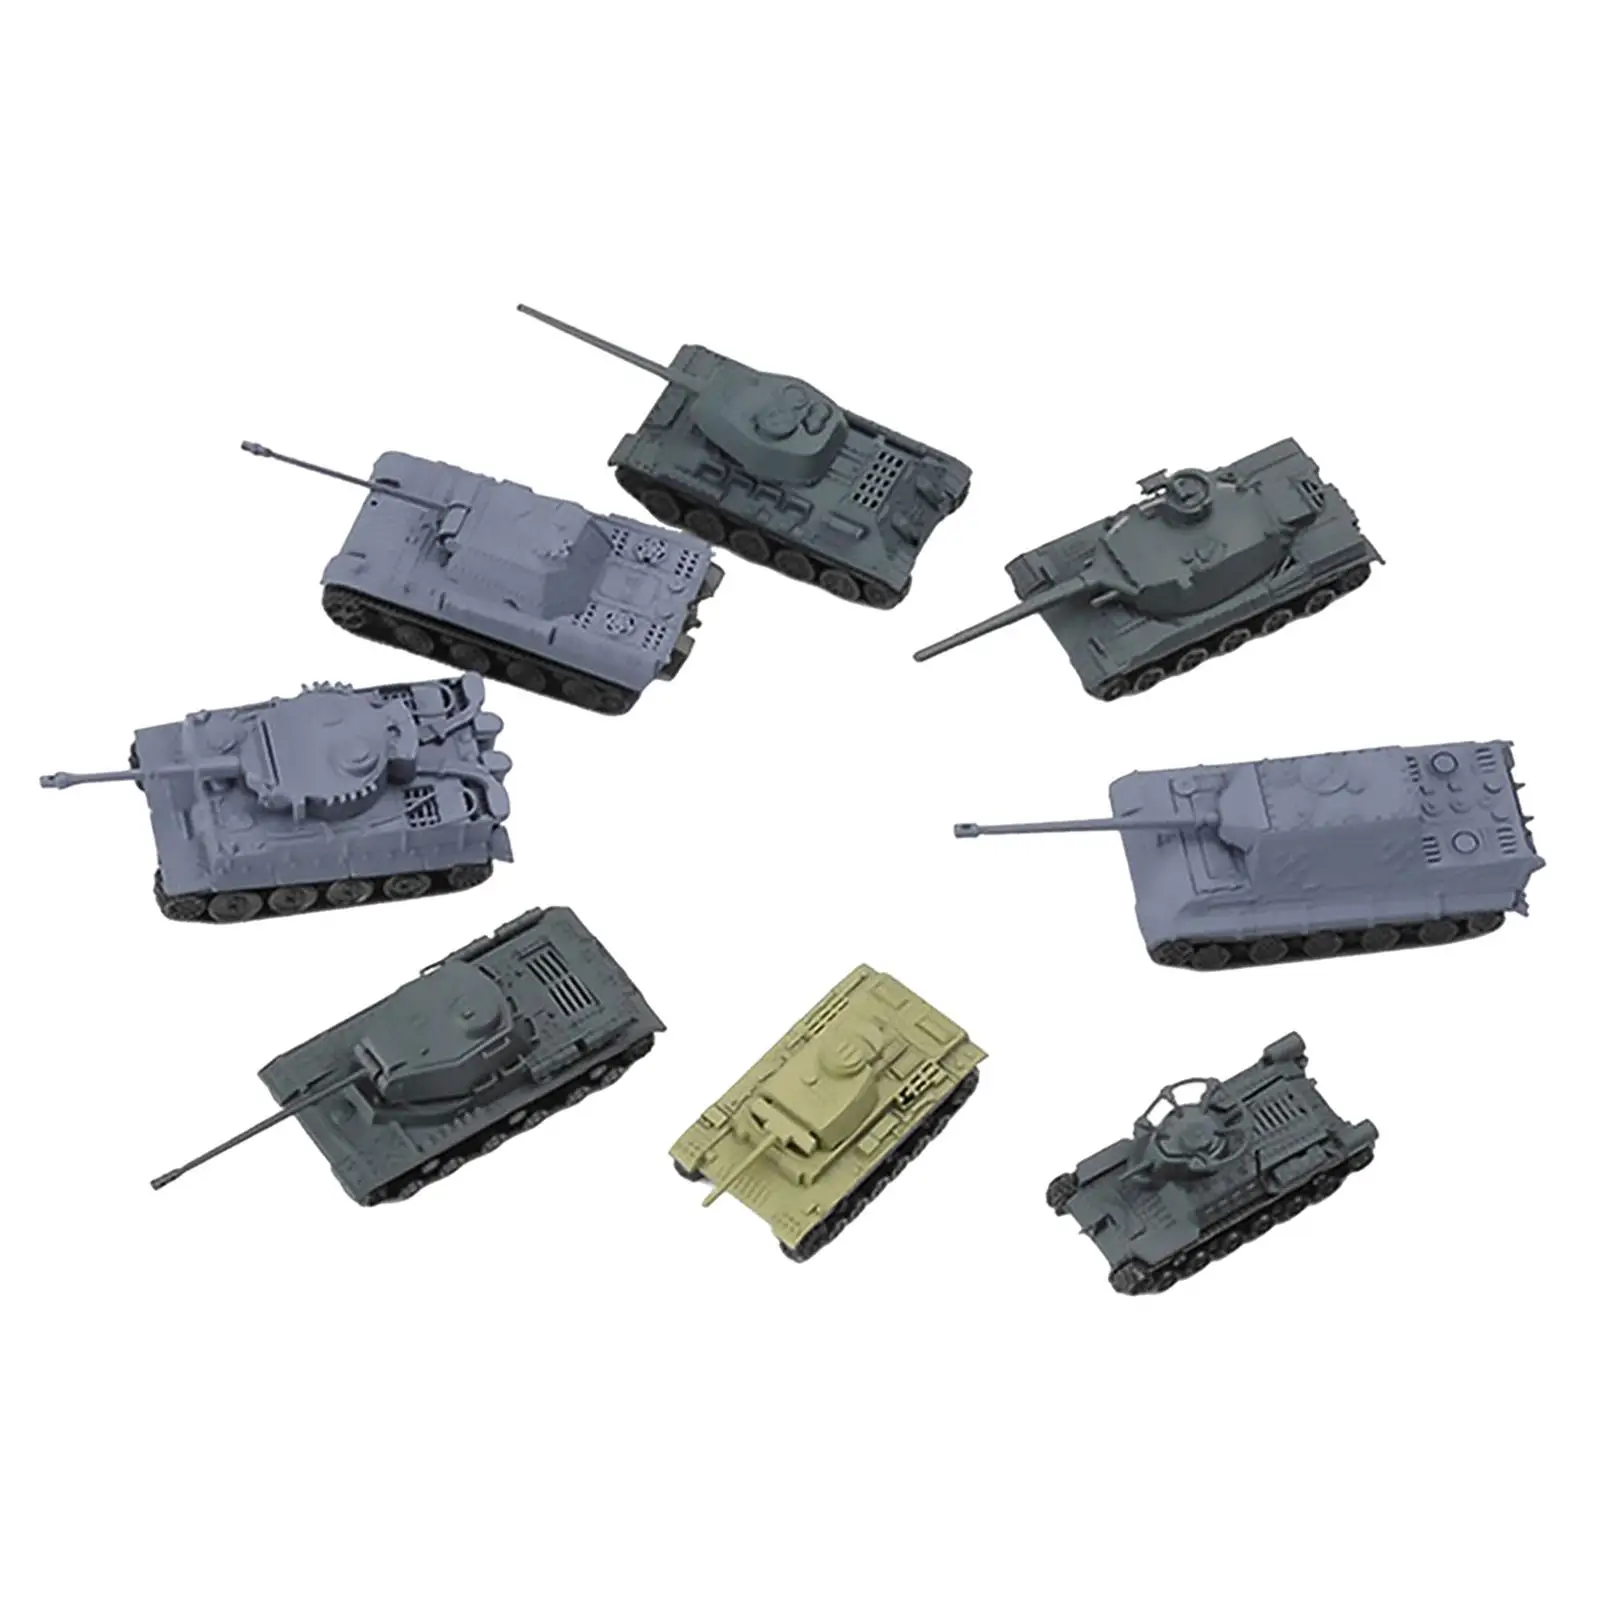 Set of 8 1:144 Assemble Tank Kits  Hobby Building for Tabletop